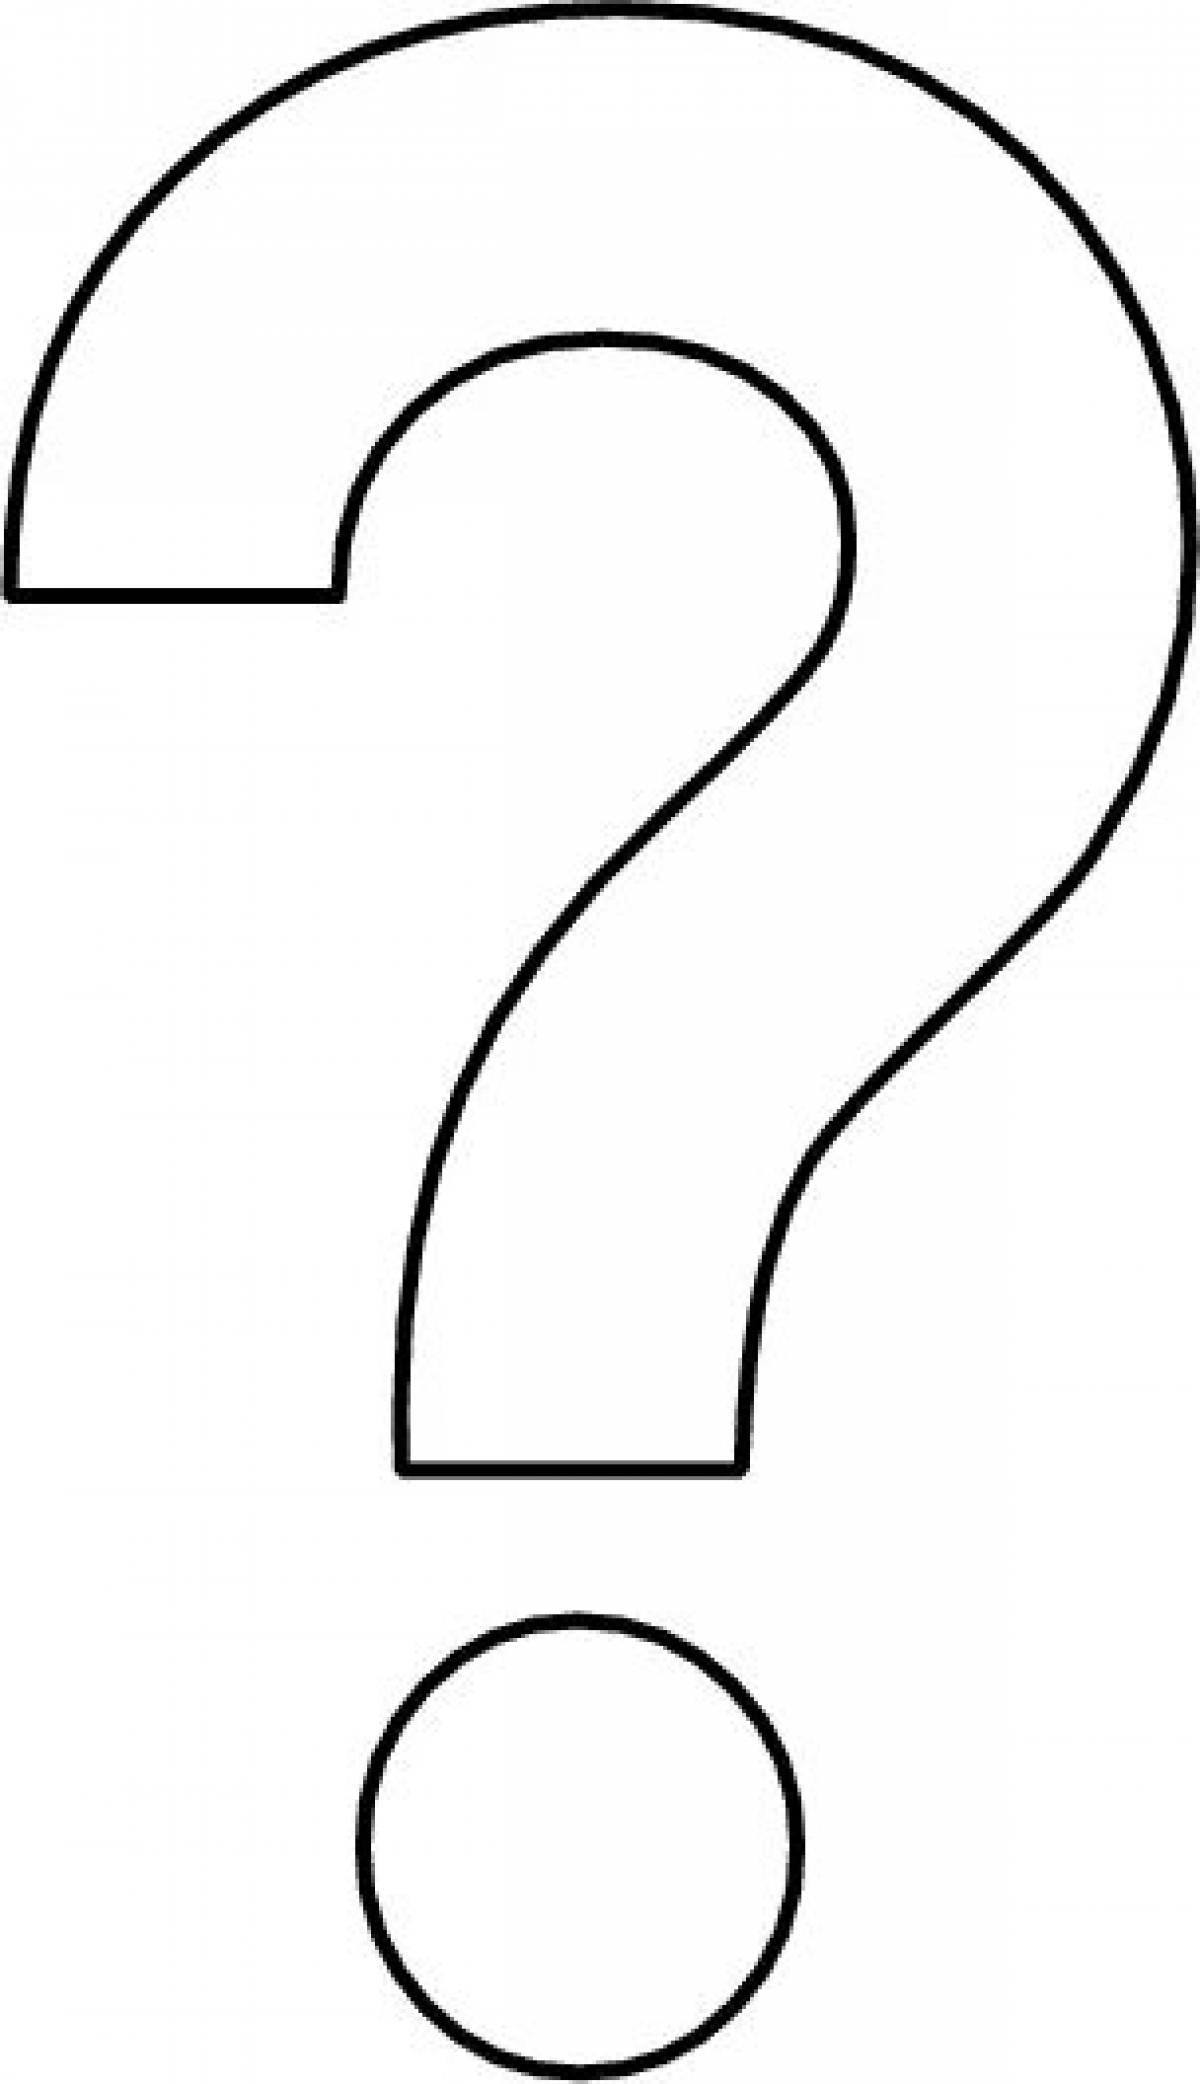 Attractive coloring page with question mark